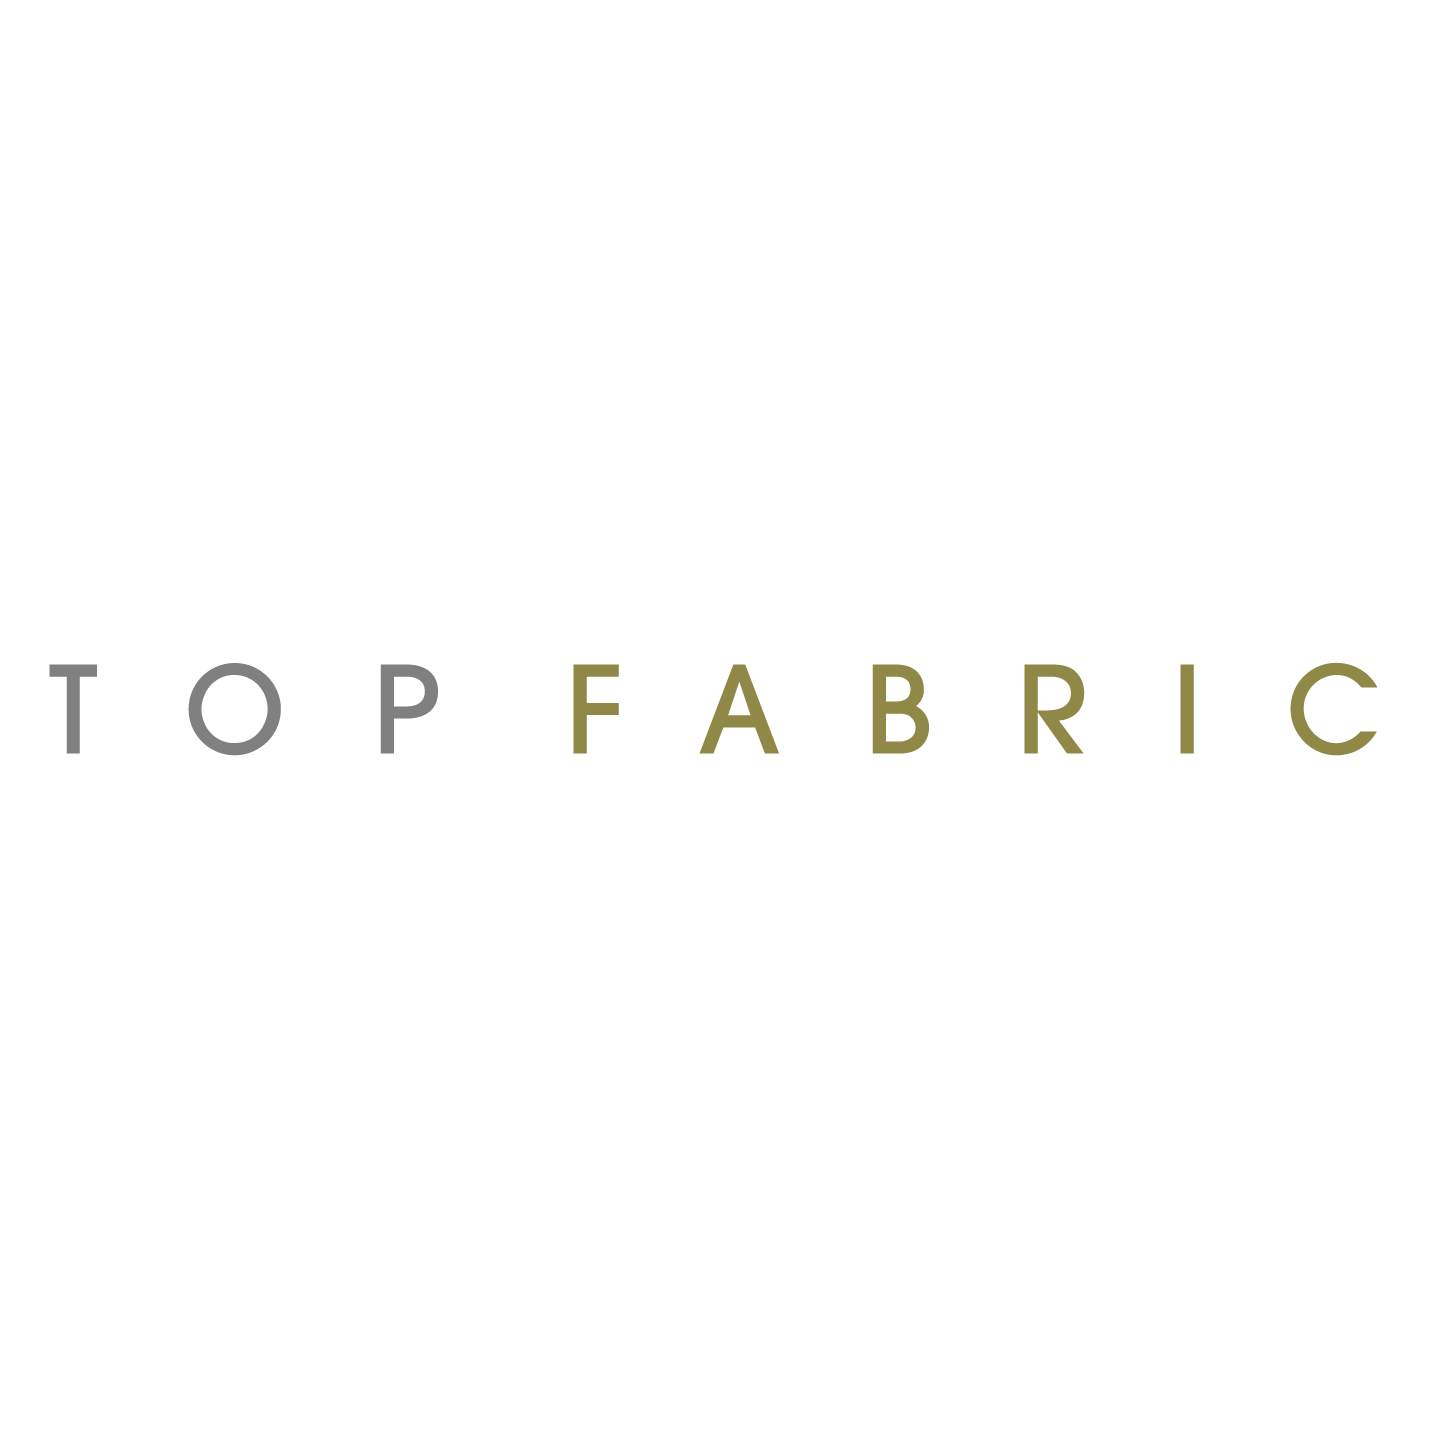 Buy fabric online - navy, blue, french, corded, lace